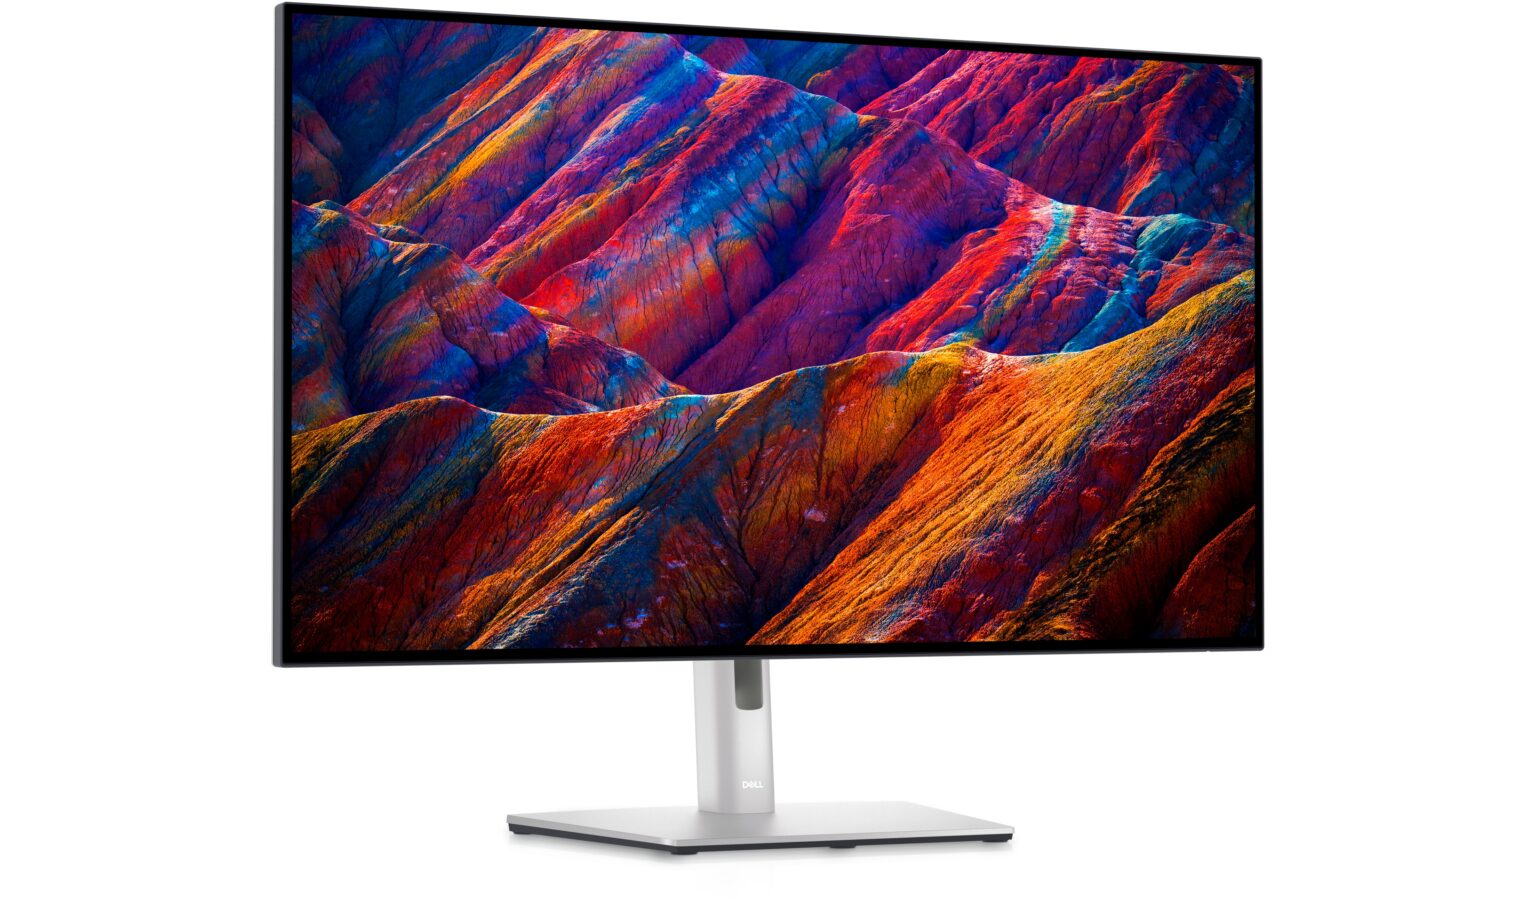 Dell's new 27-inch and 32-inch UltraSharp monitors are the first to use LG's IPS Black Technology.